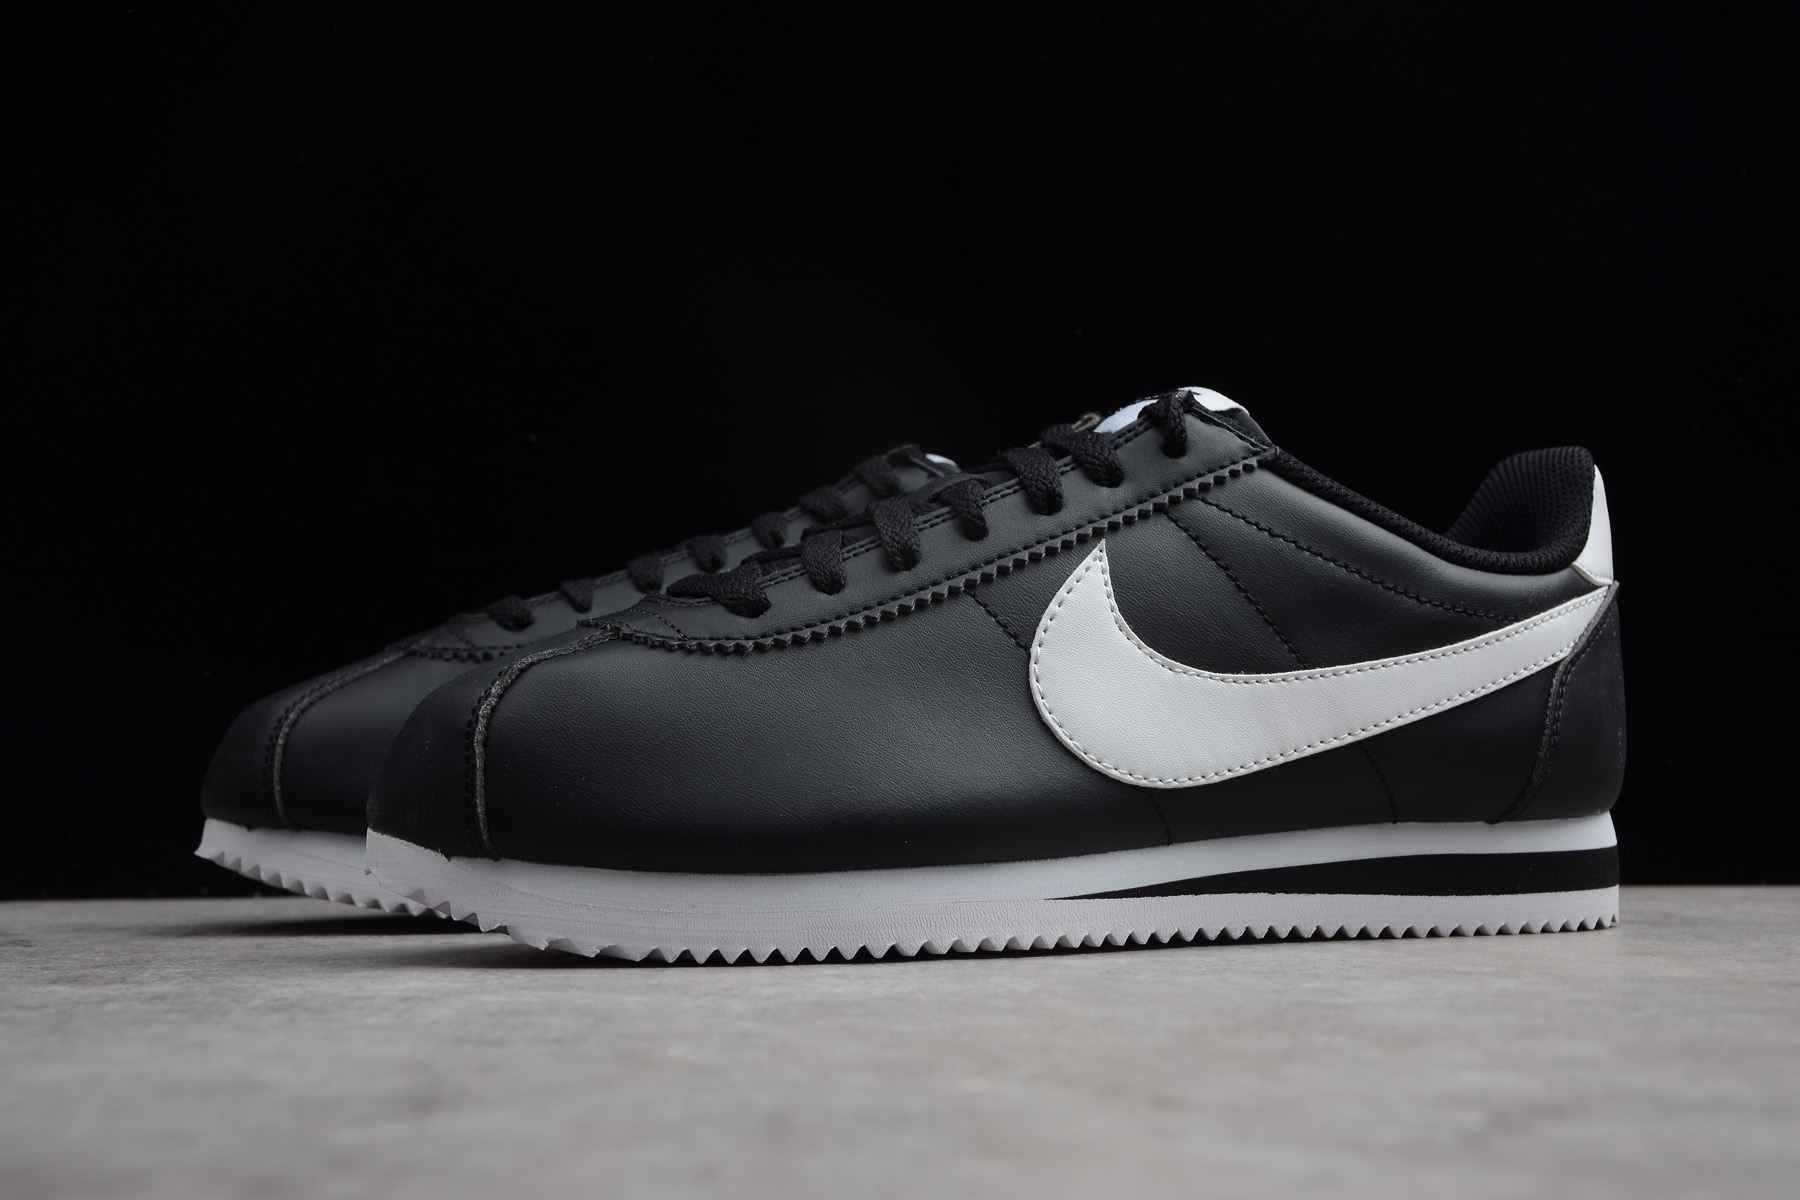 Nike Classic Cortez Leather Black/White Men's and Women's Size 807471-010